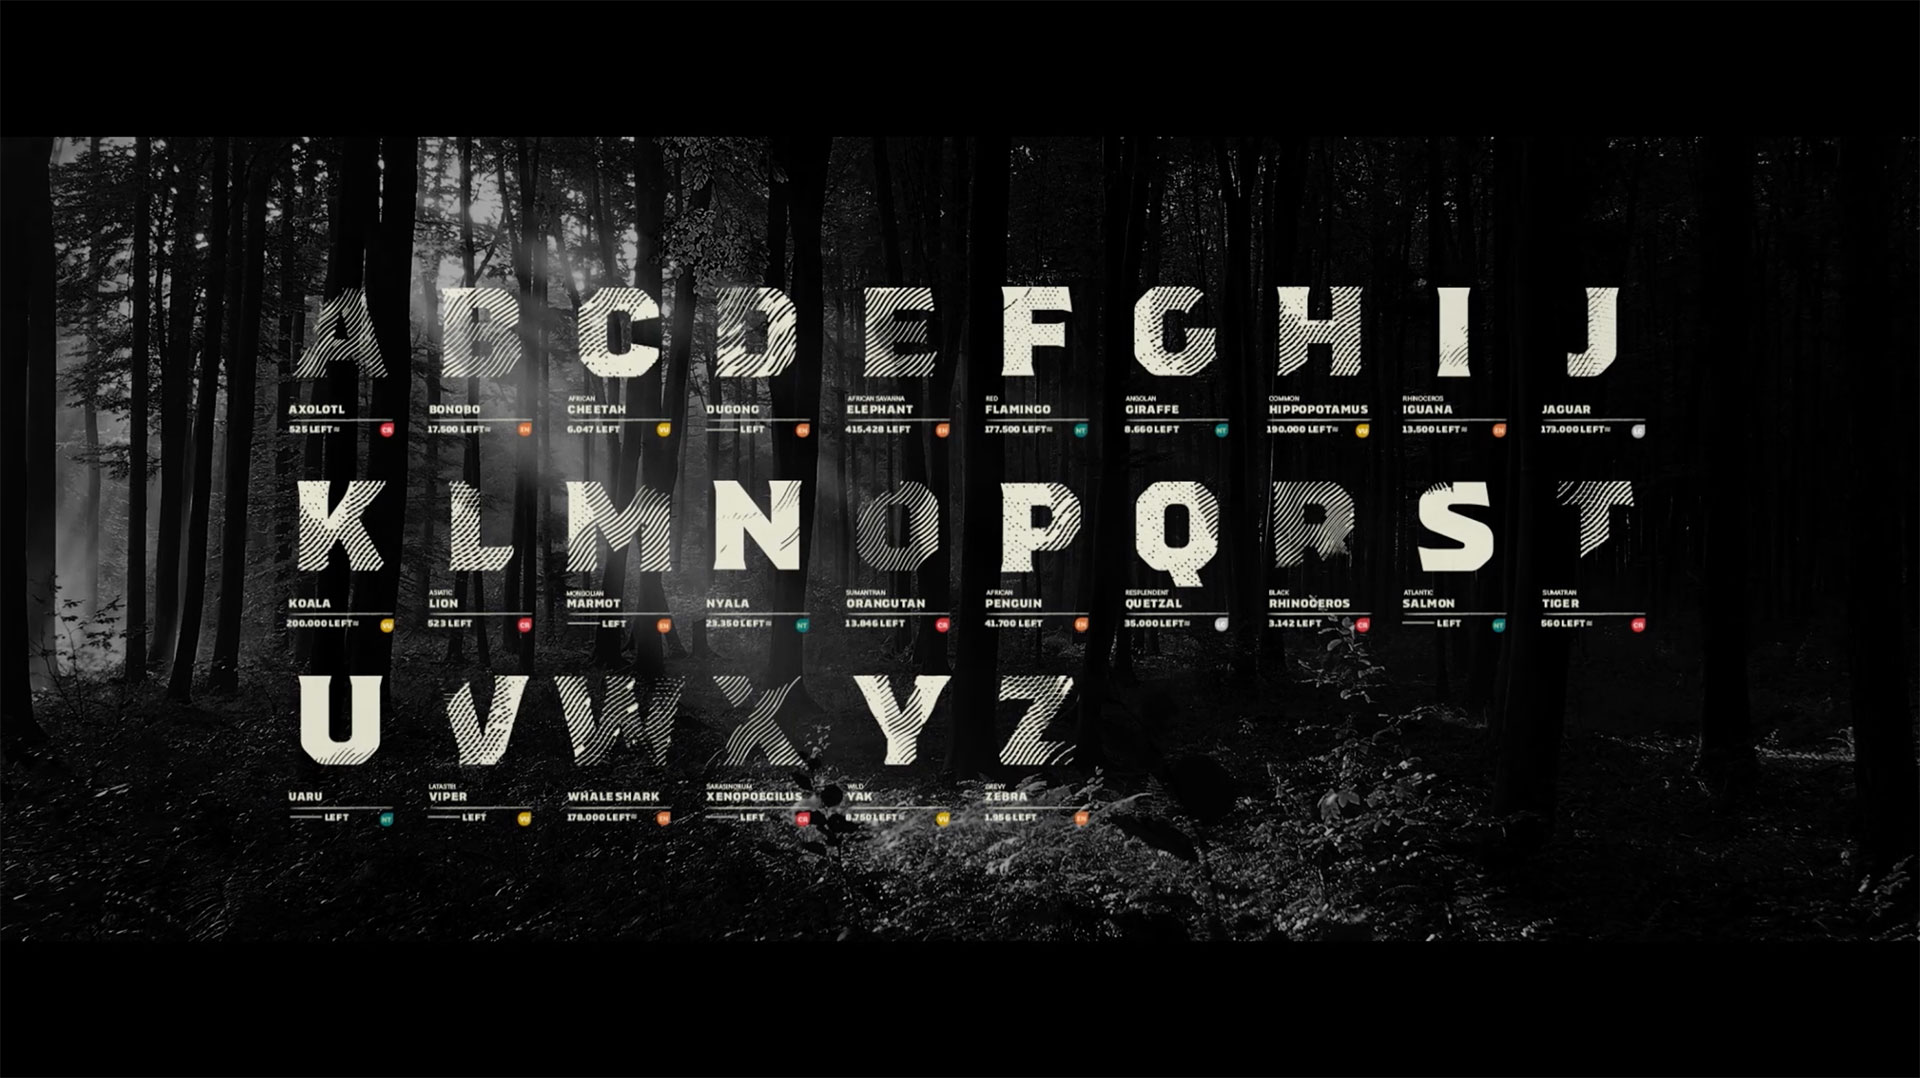 The Endangered Typeface